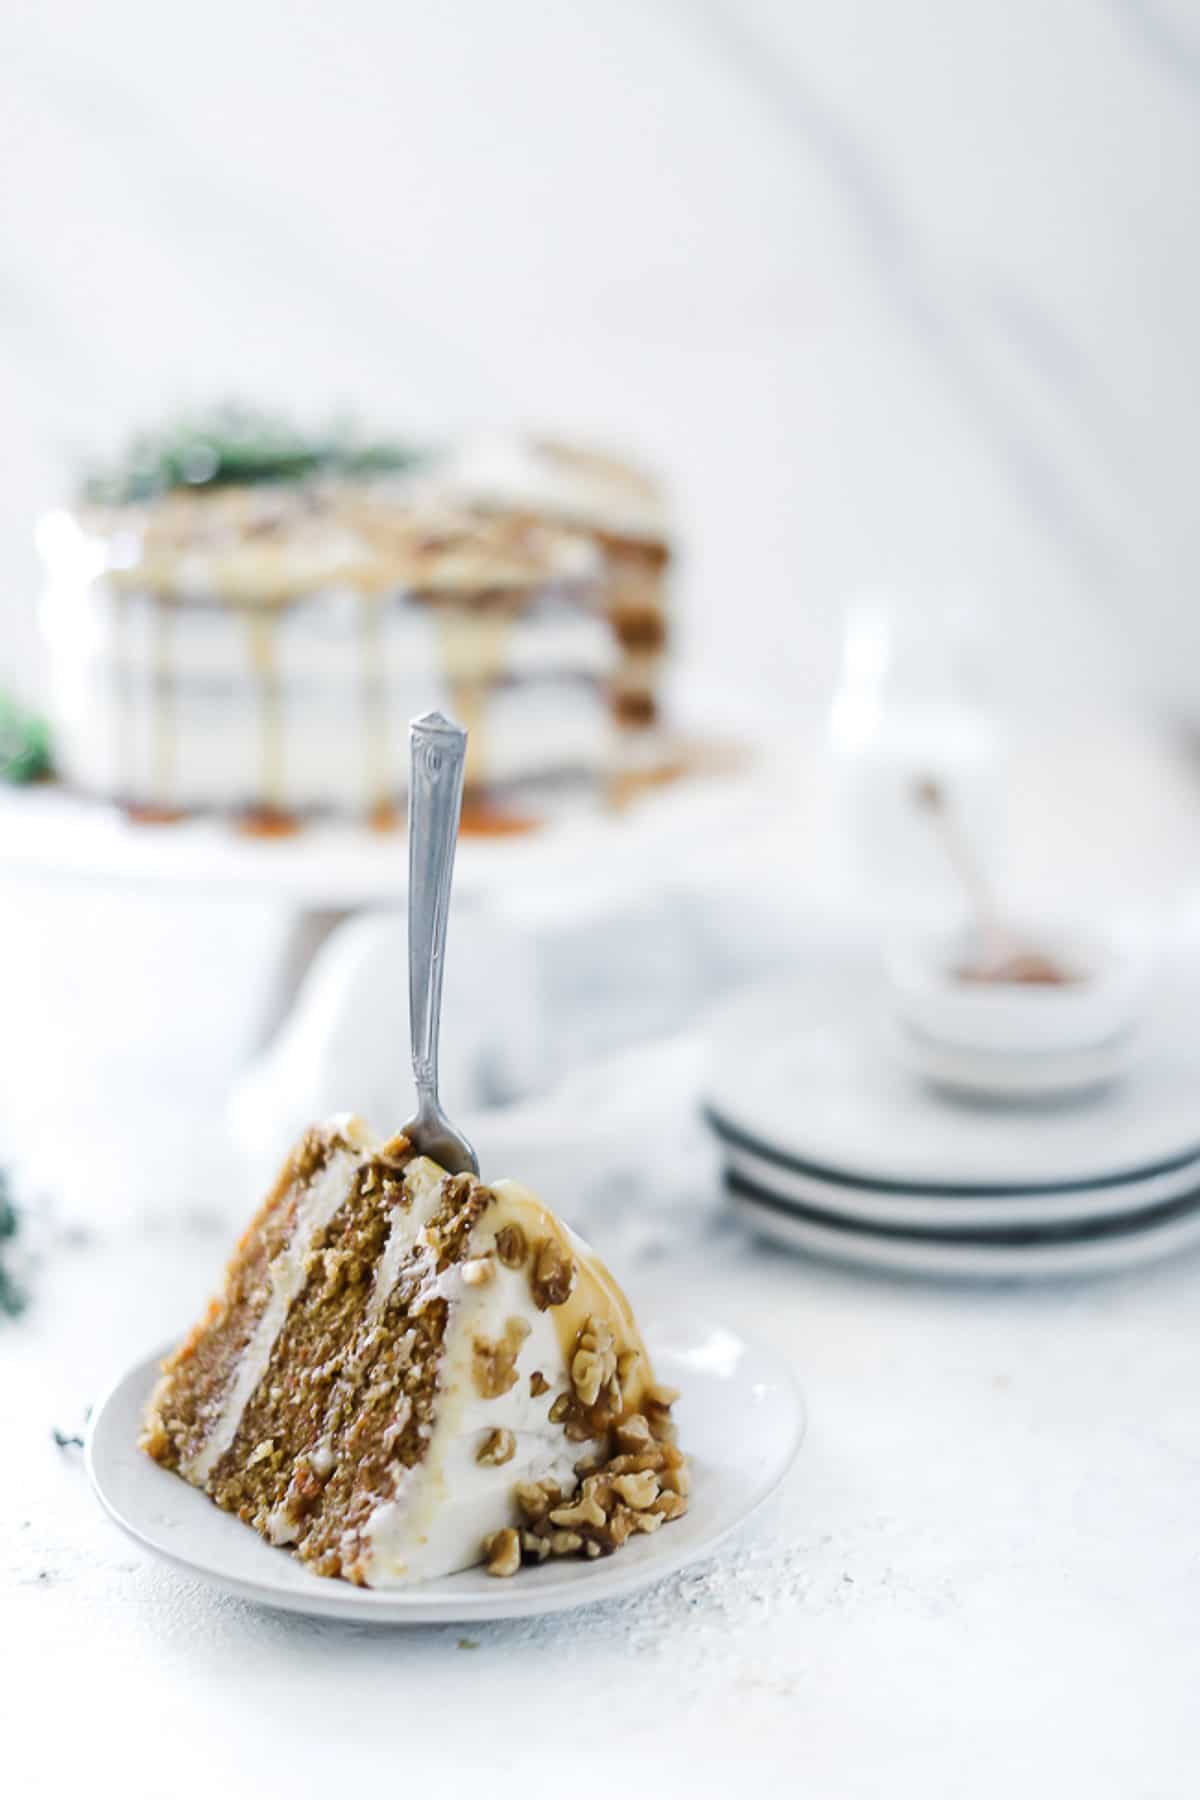 A slice of carrot cake on a white plate with a fork stuck in it. There is a full cake in the background.